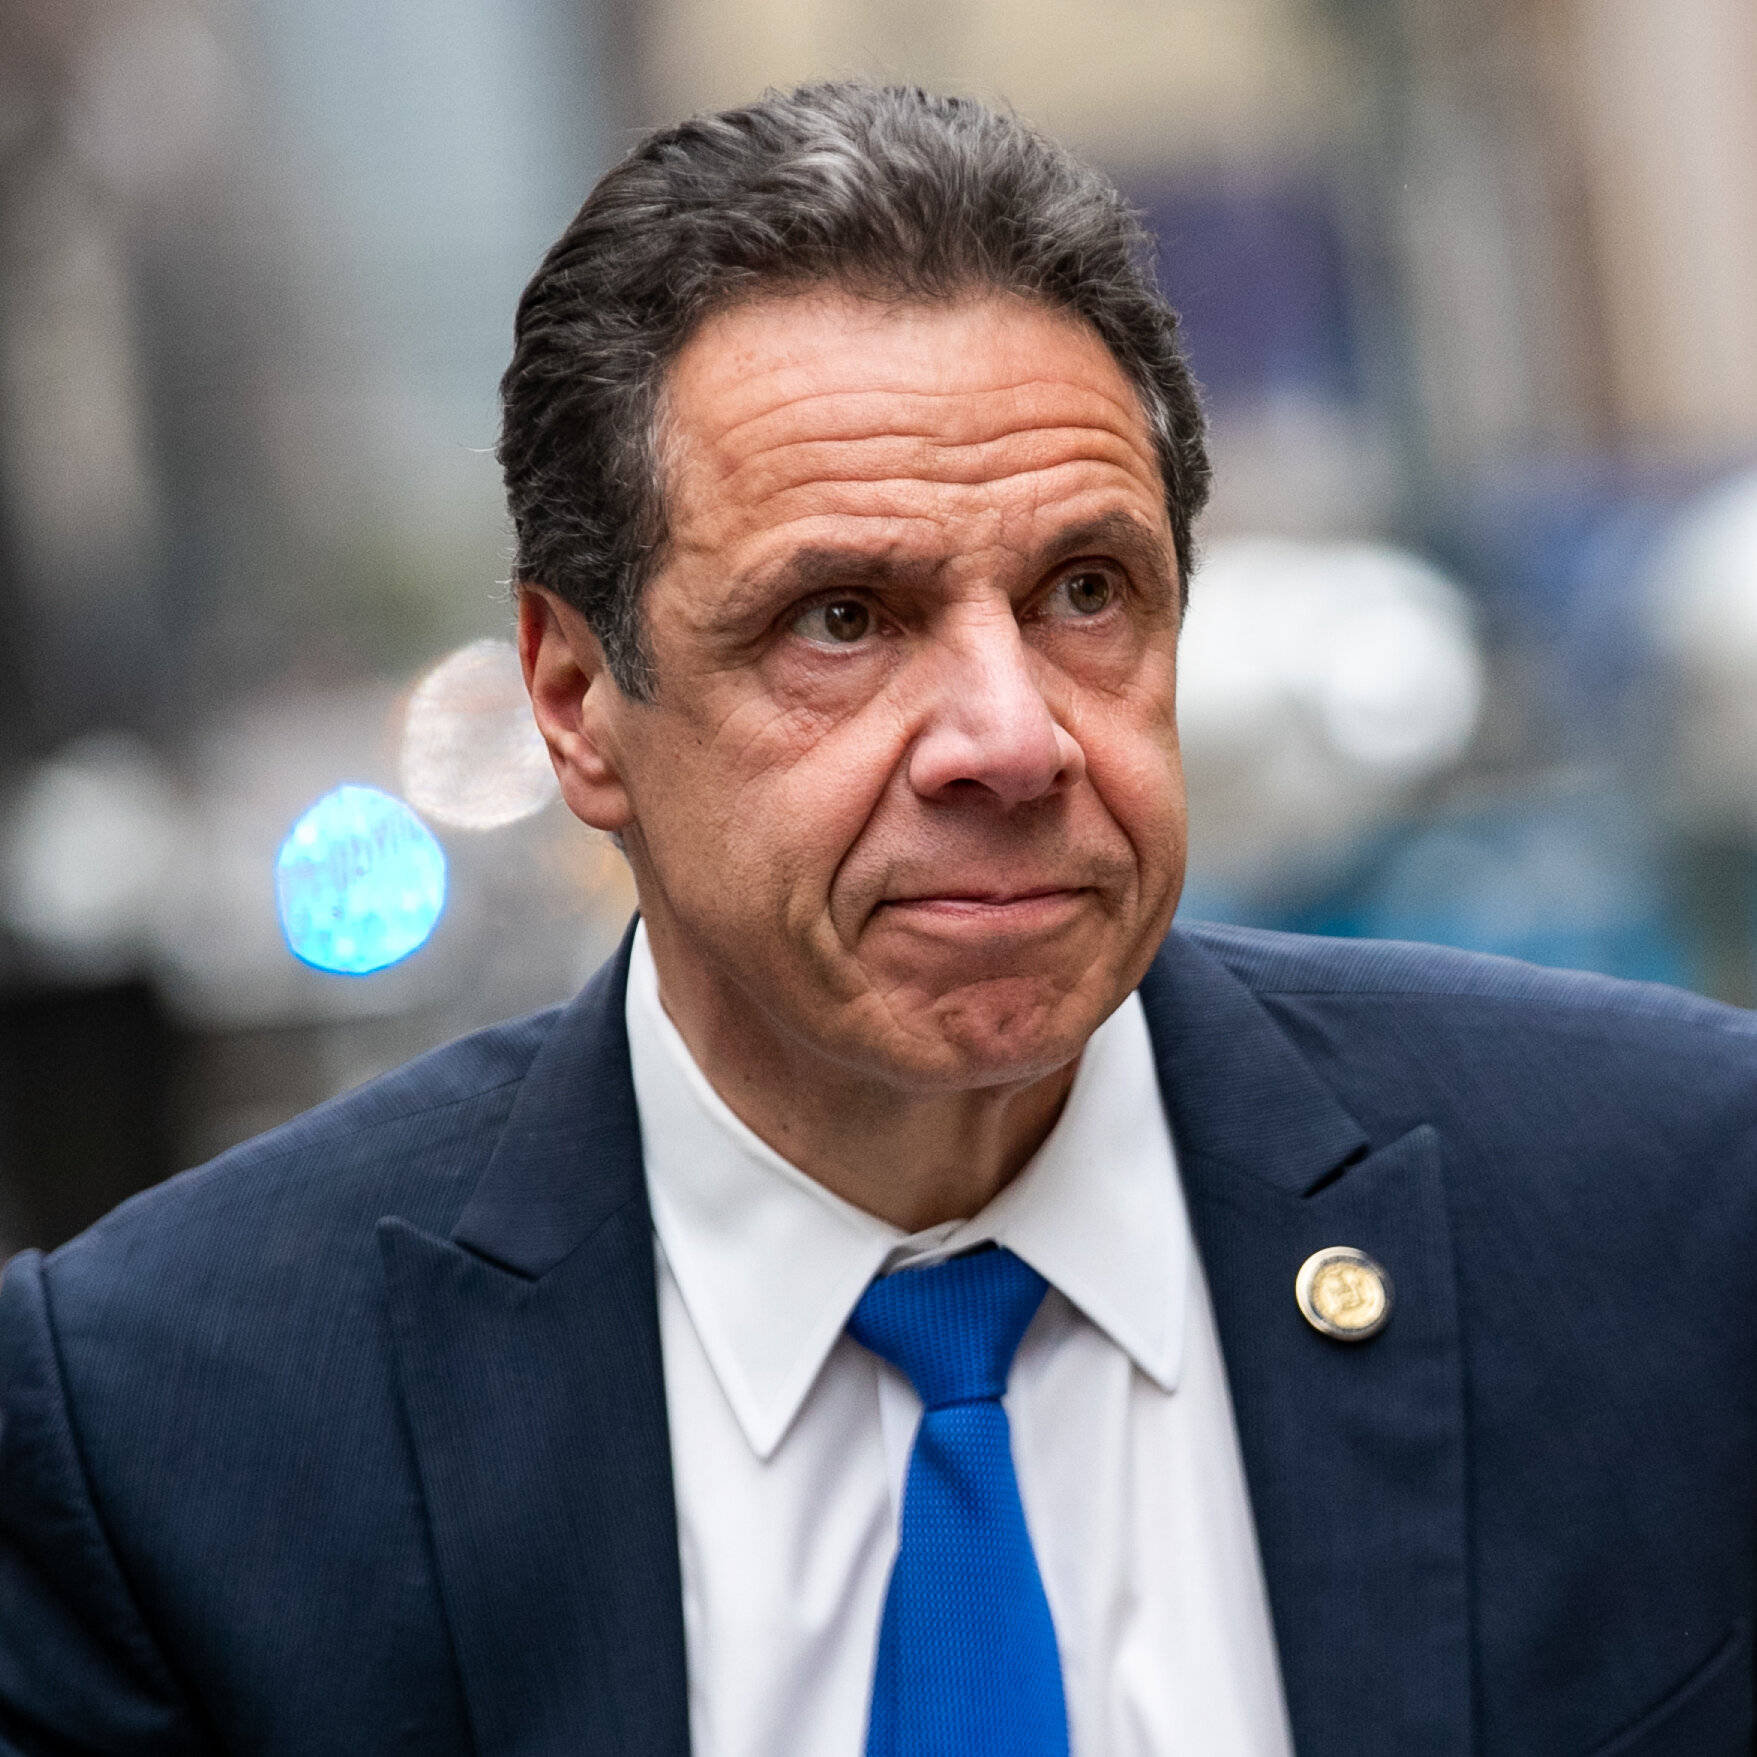 Round Pin On Andrew Cuomo's Suit Wallpaper